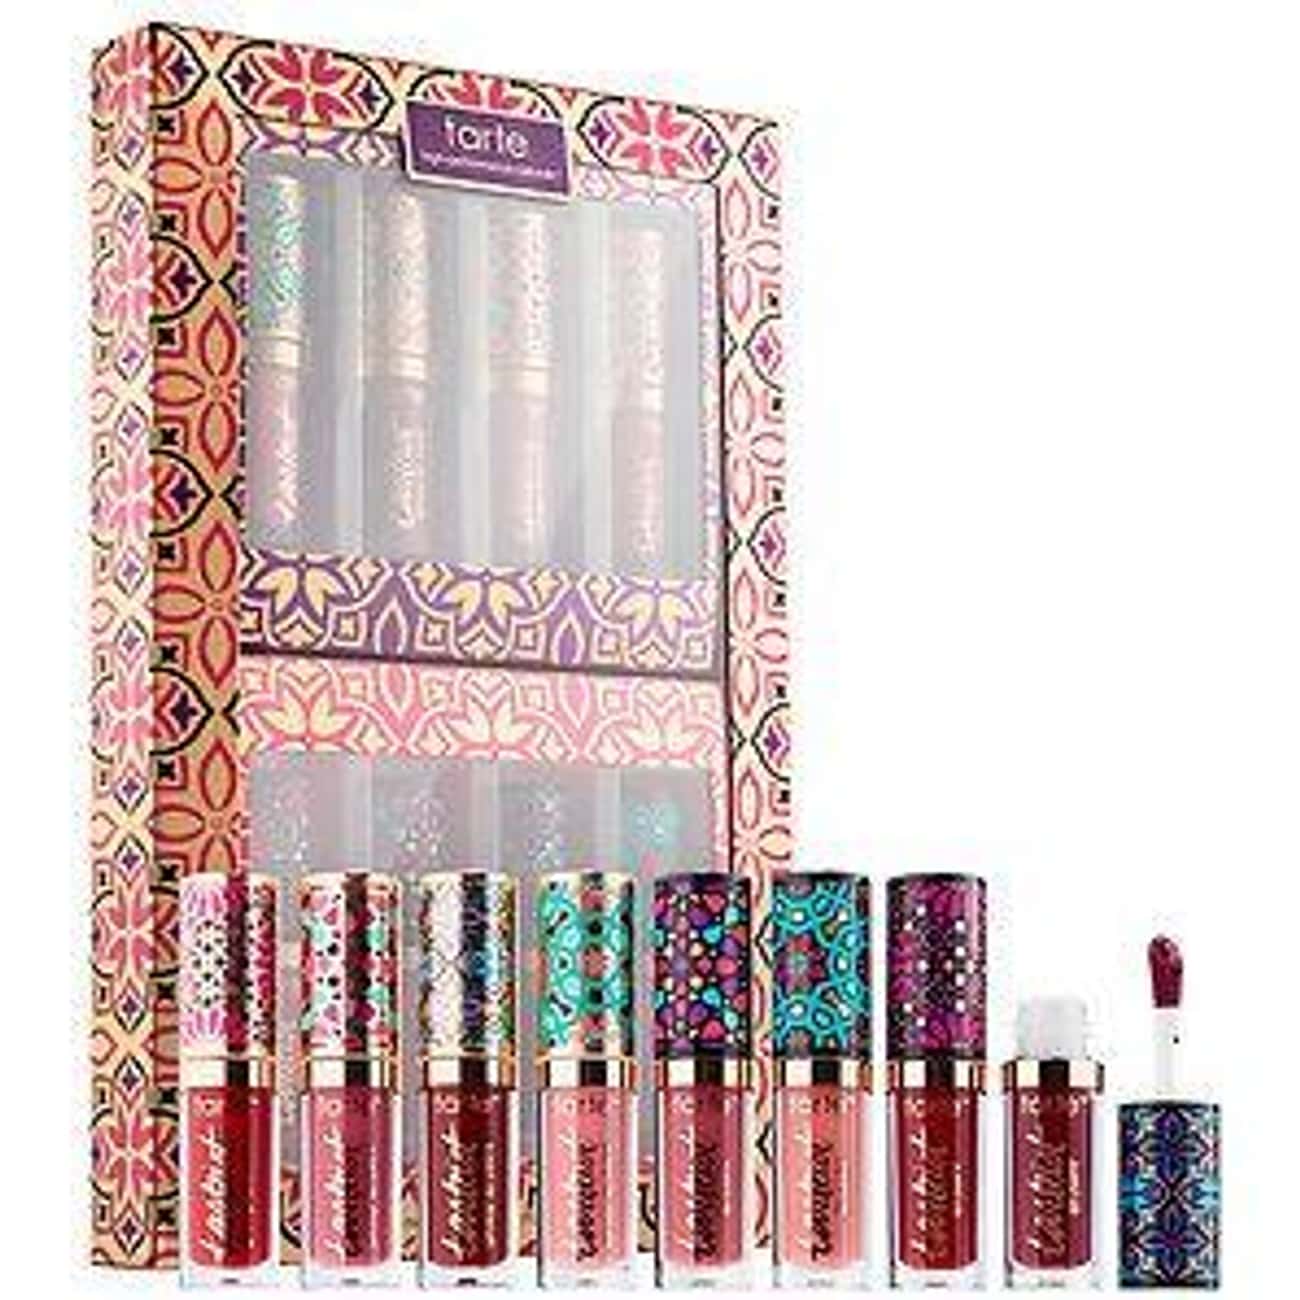 Limited-Edition Posh Pout Quick Dry & Glossy Lip Set By Tarte